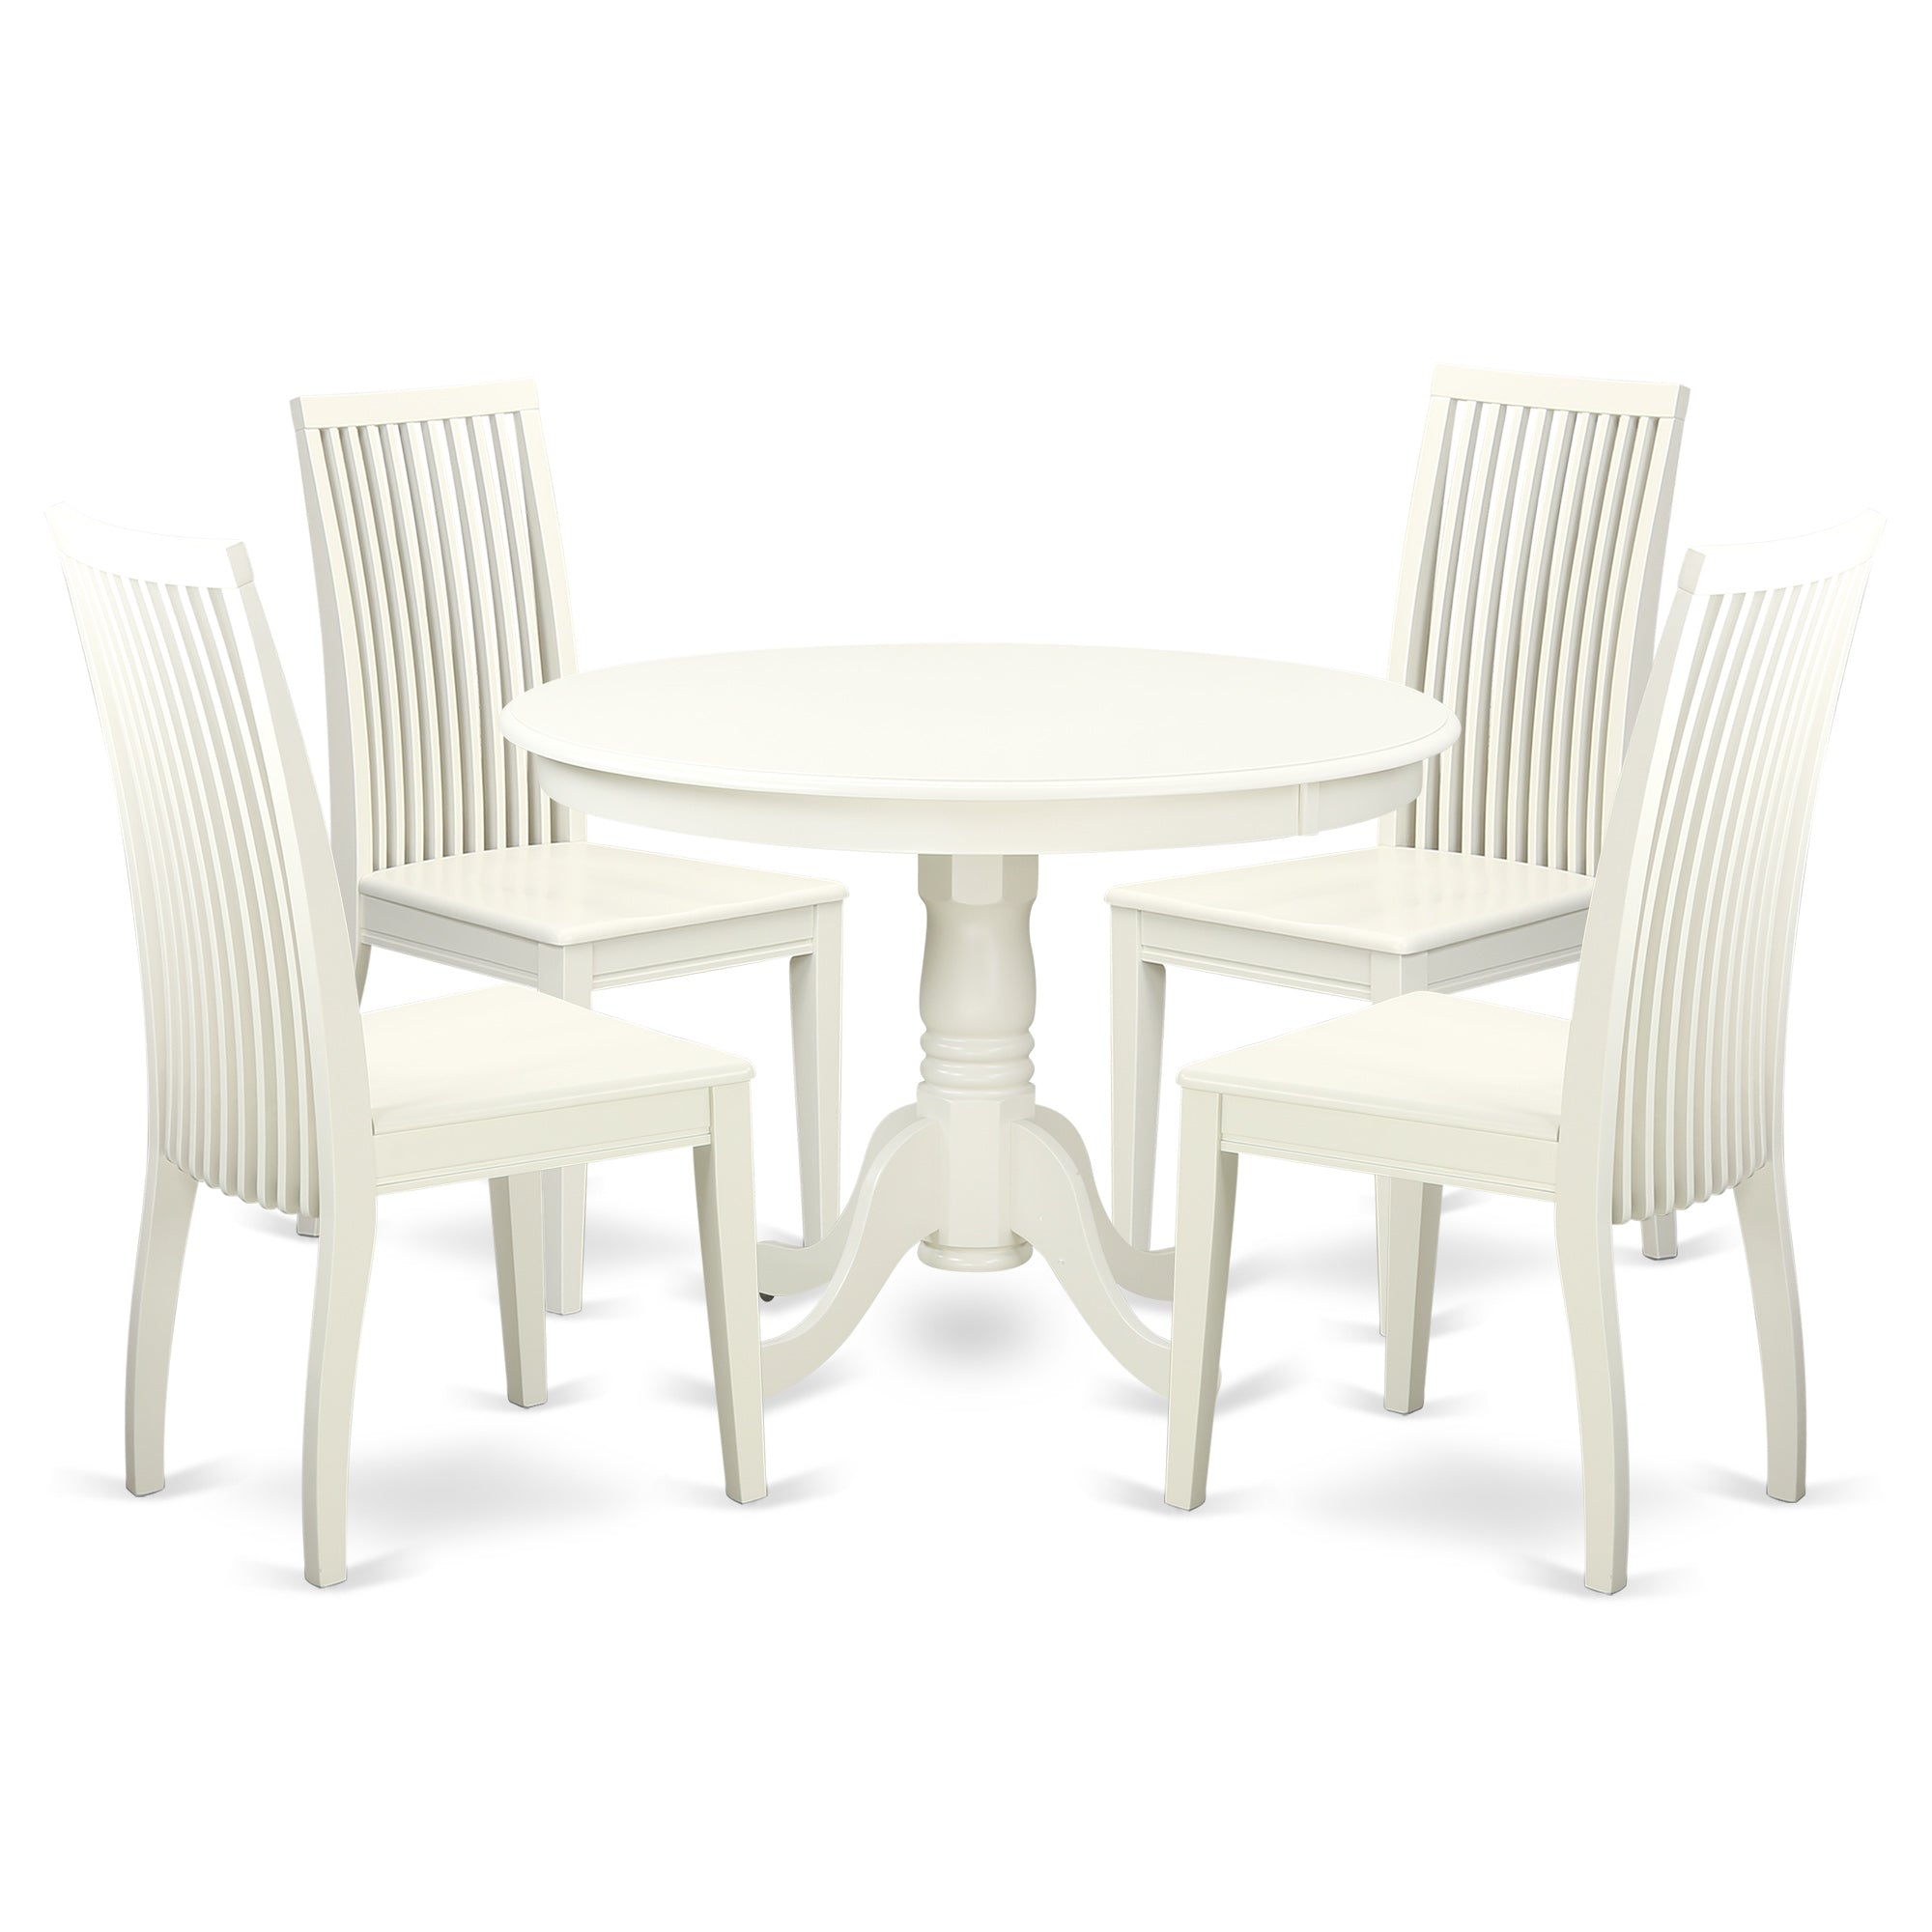 HLIP5-LWH-W 5-Piece Hartland Set With One Dining Table And Four Wood Seat Dinette Chairs In A Beautiful Linen White Finish.